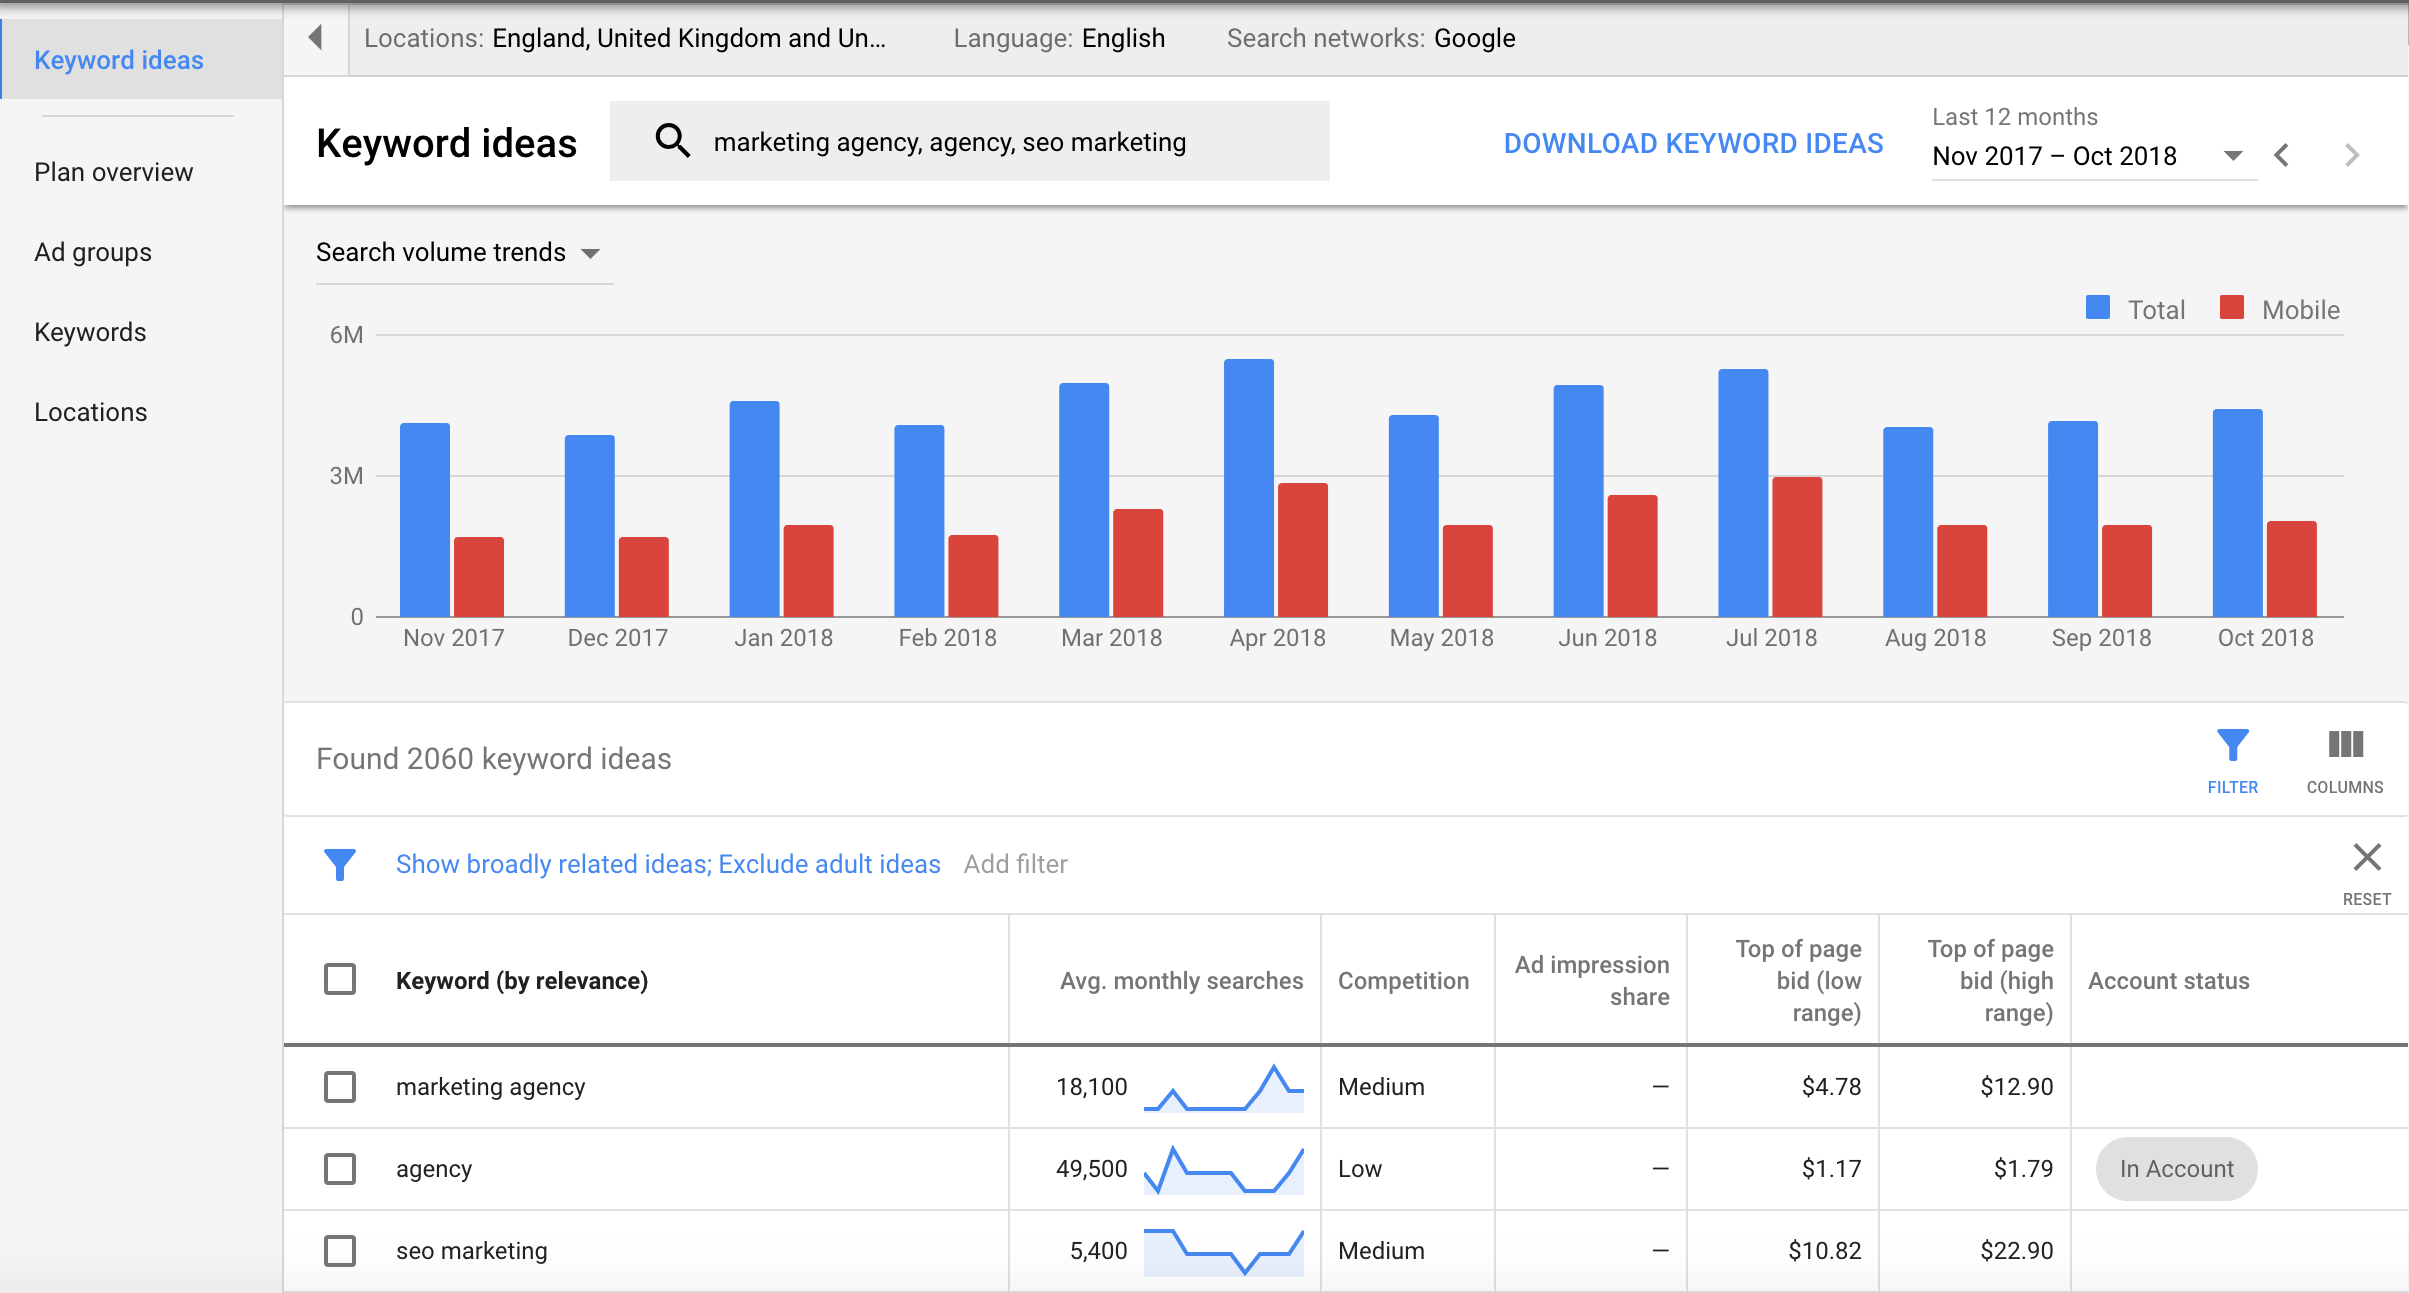 7 Ways to Use Google's Keyword Planner That You Haven't Thought Of